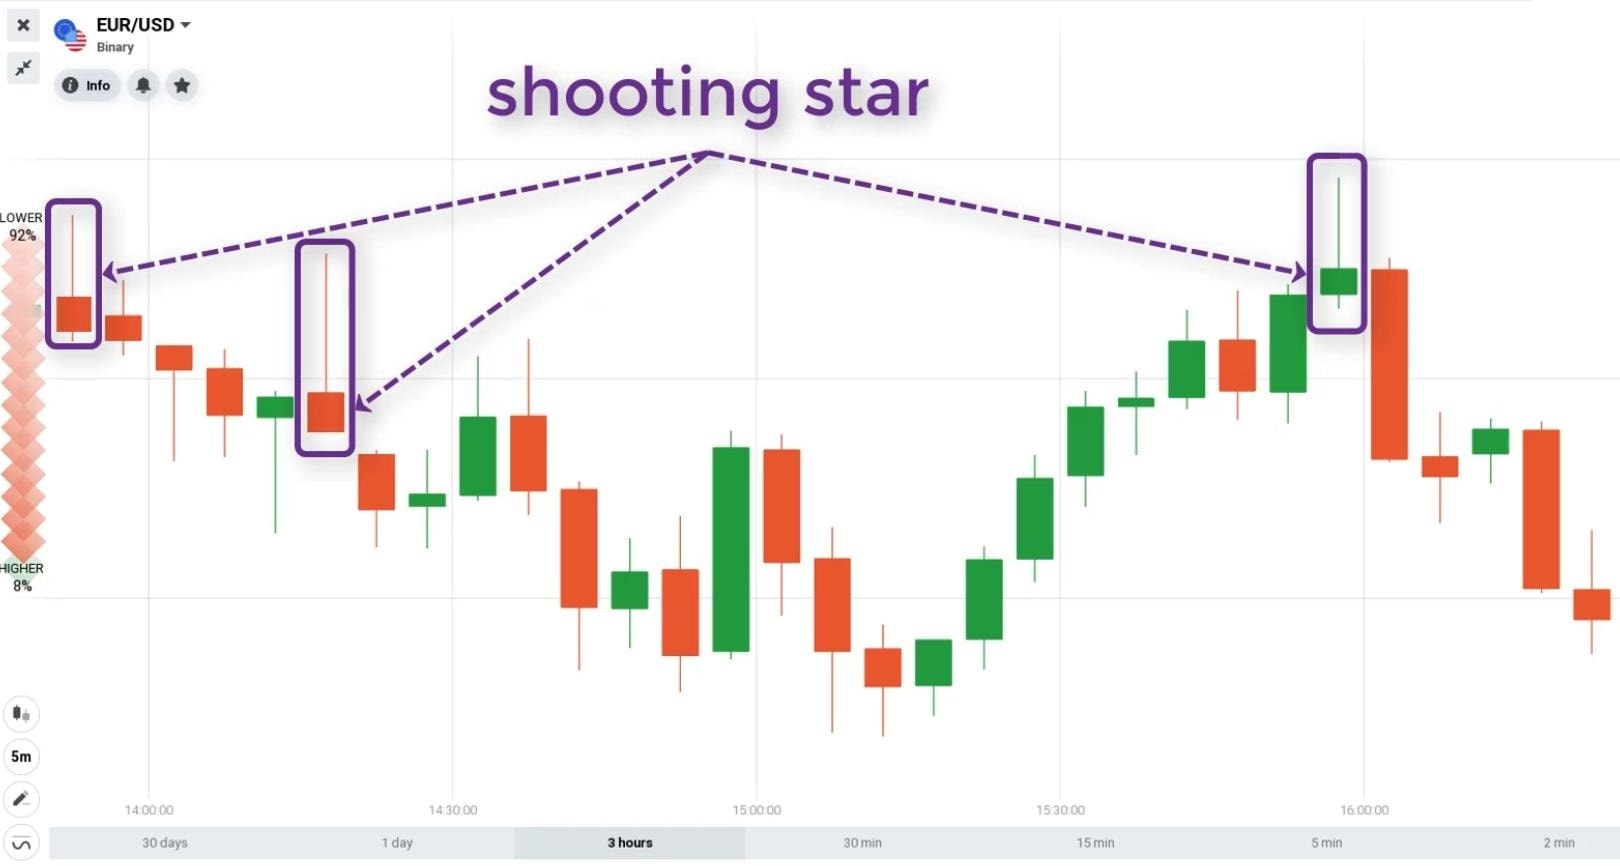 shooting-star-candle-on-the-japanese-price-chart